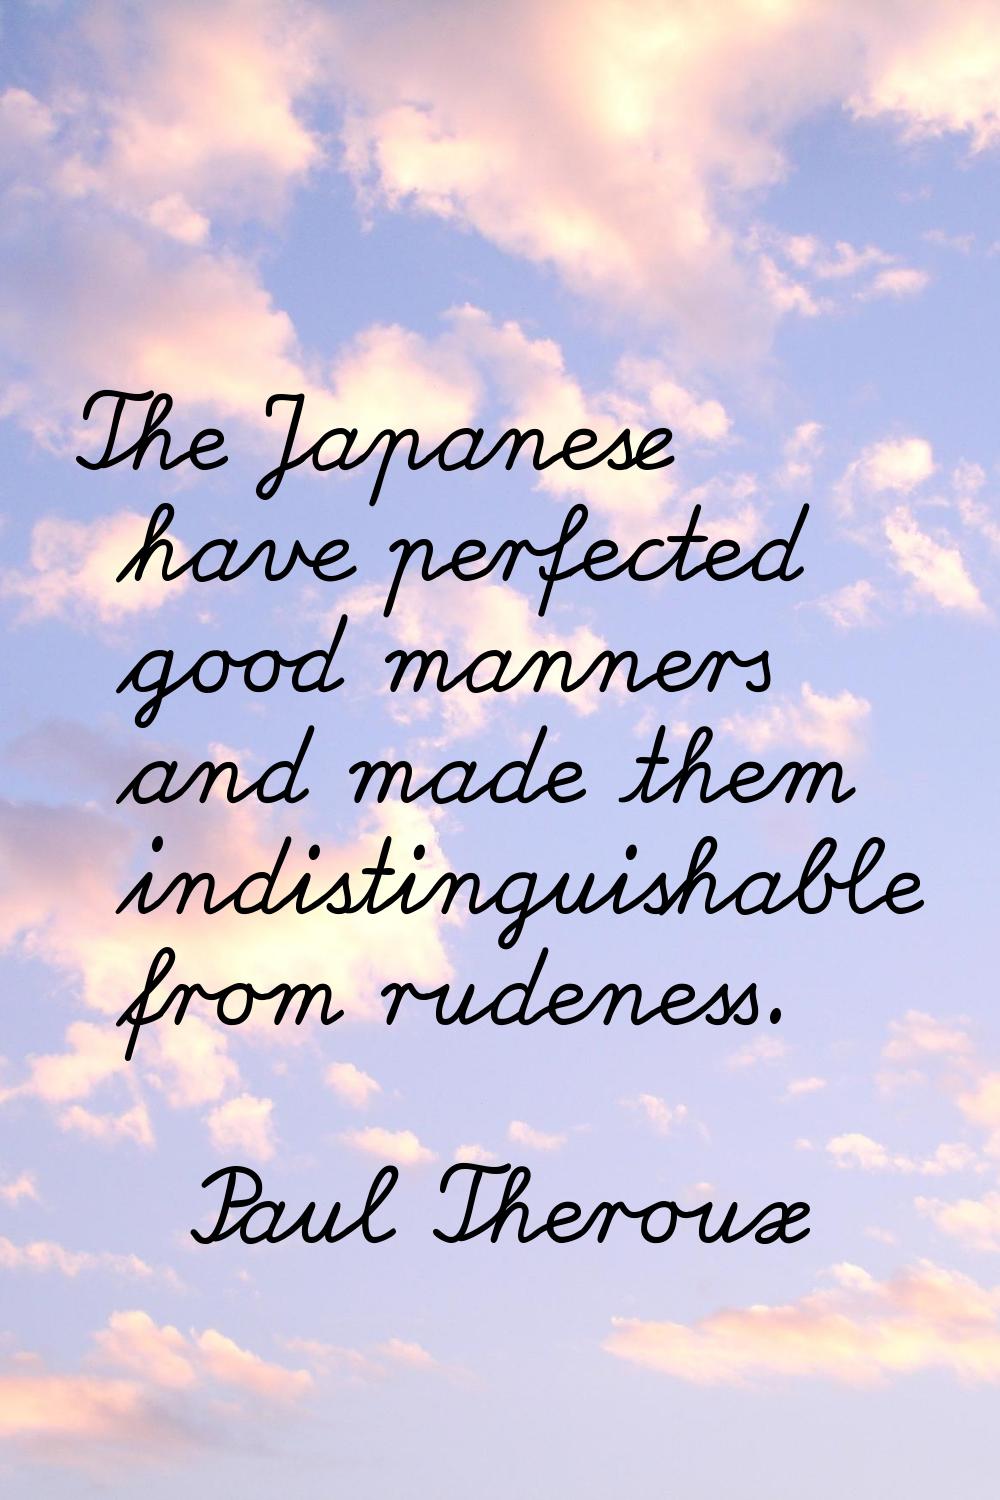 The Japanese have perfected good manners and made them indistinguishable from rudeness.